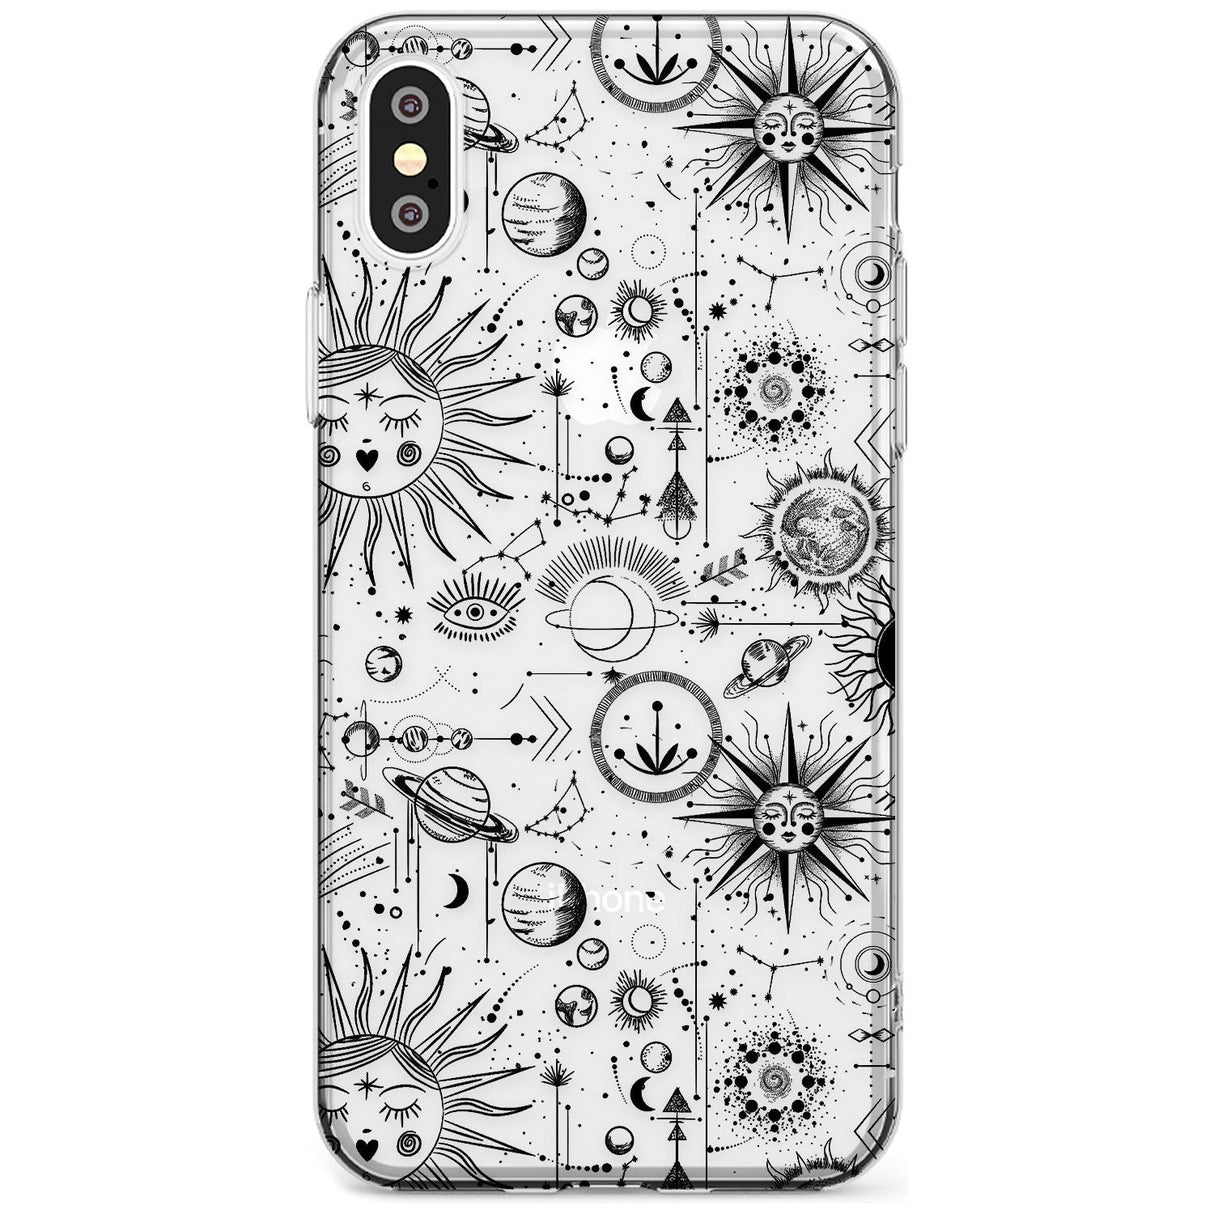 Suns & Planets Vintage Astrological Slim TPU Phone Case Warehouse X XS Max XR